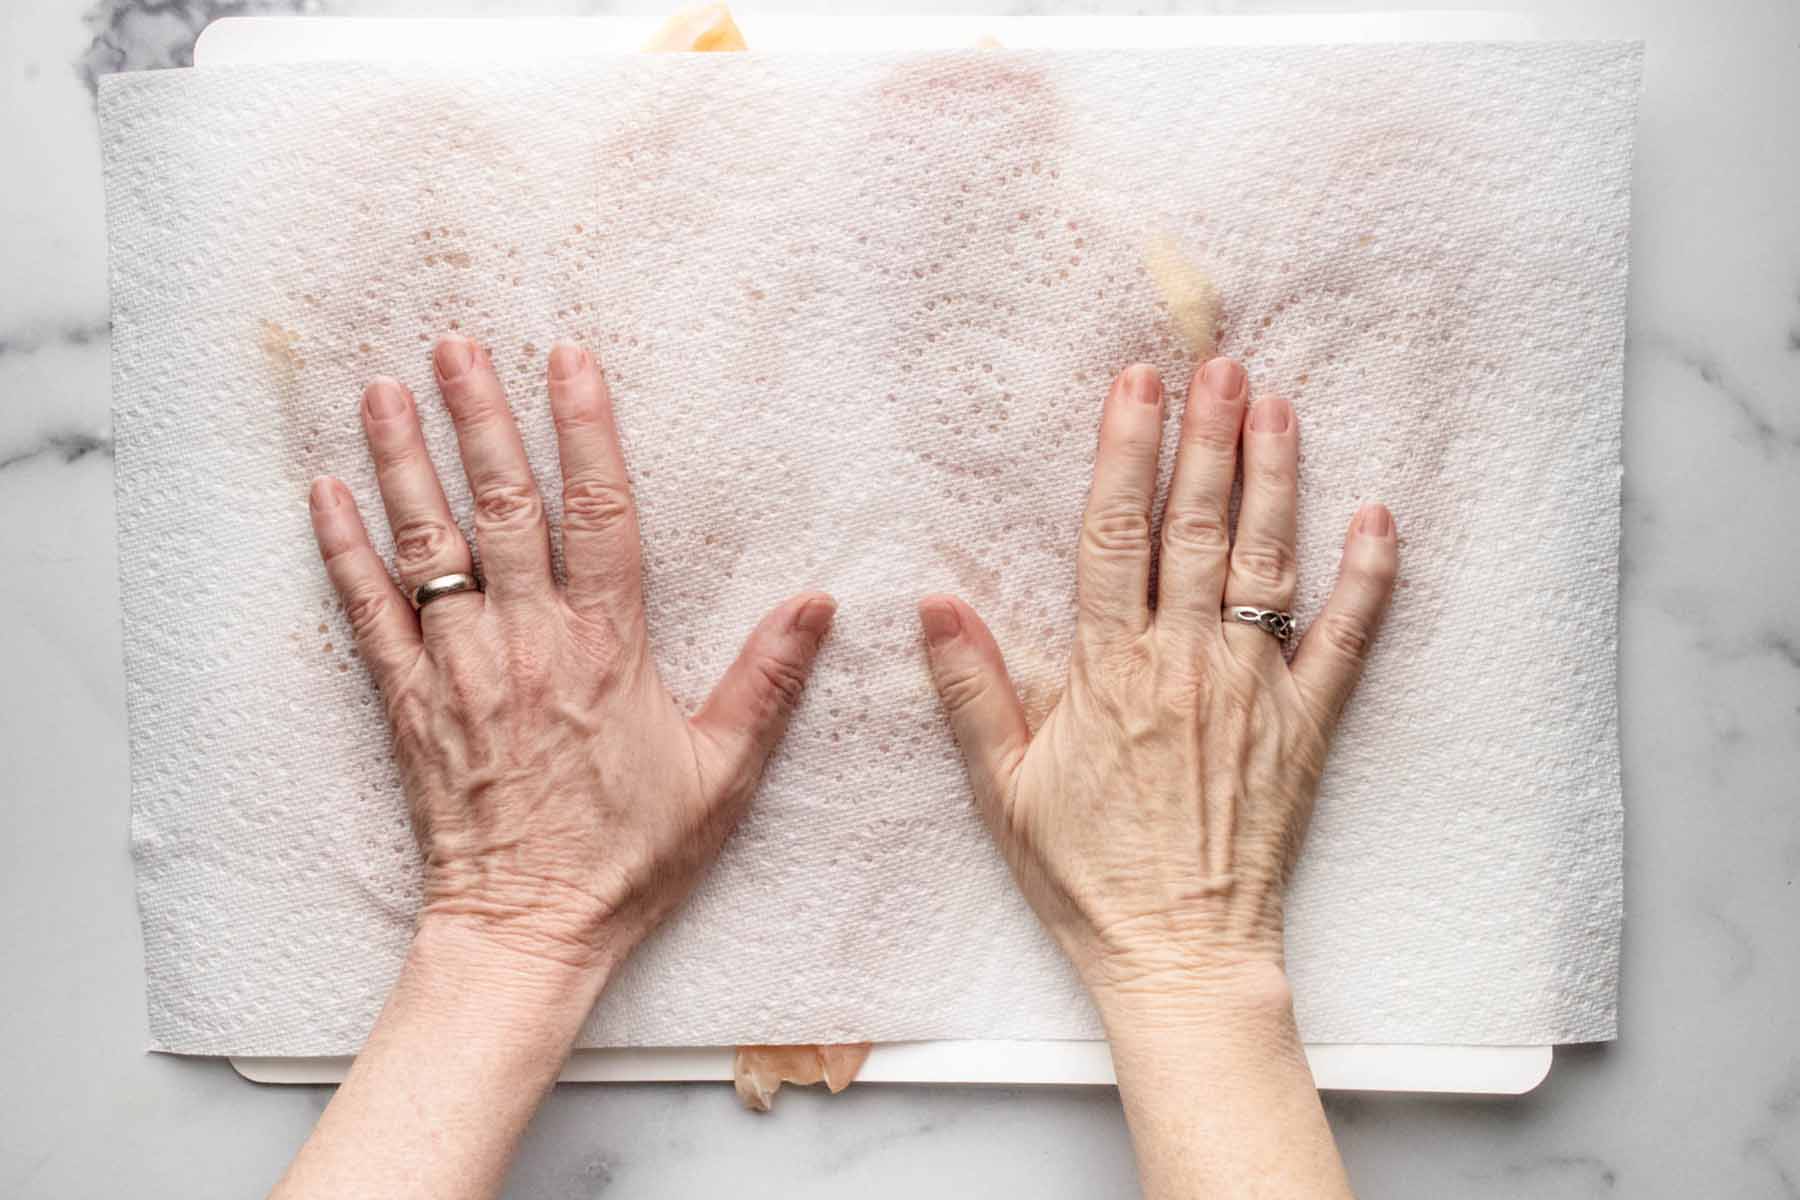 Paper towels on top of chicken cutlets with hands pressing down on the towels.